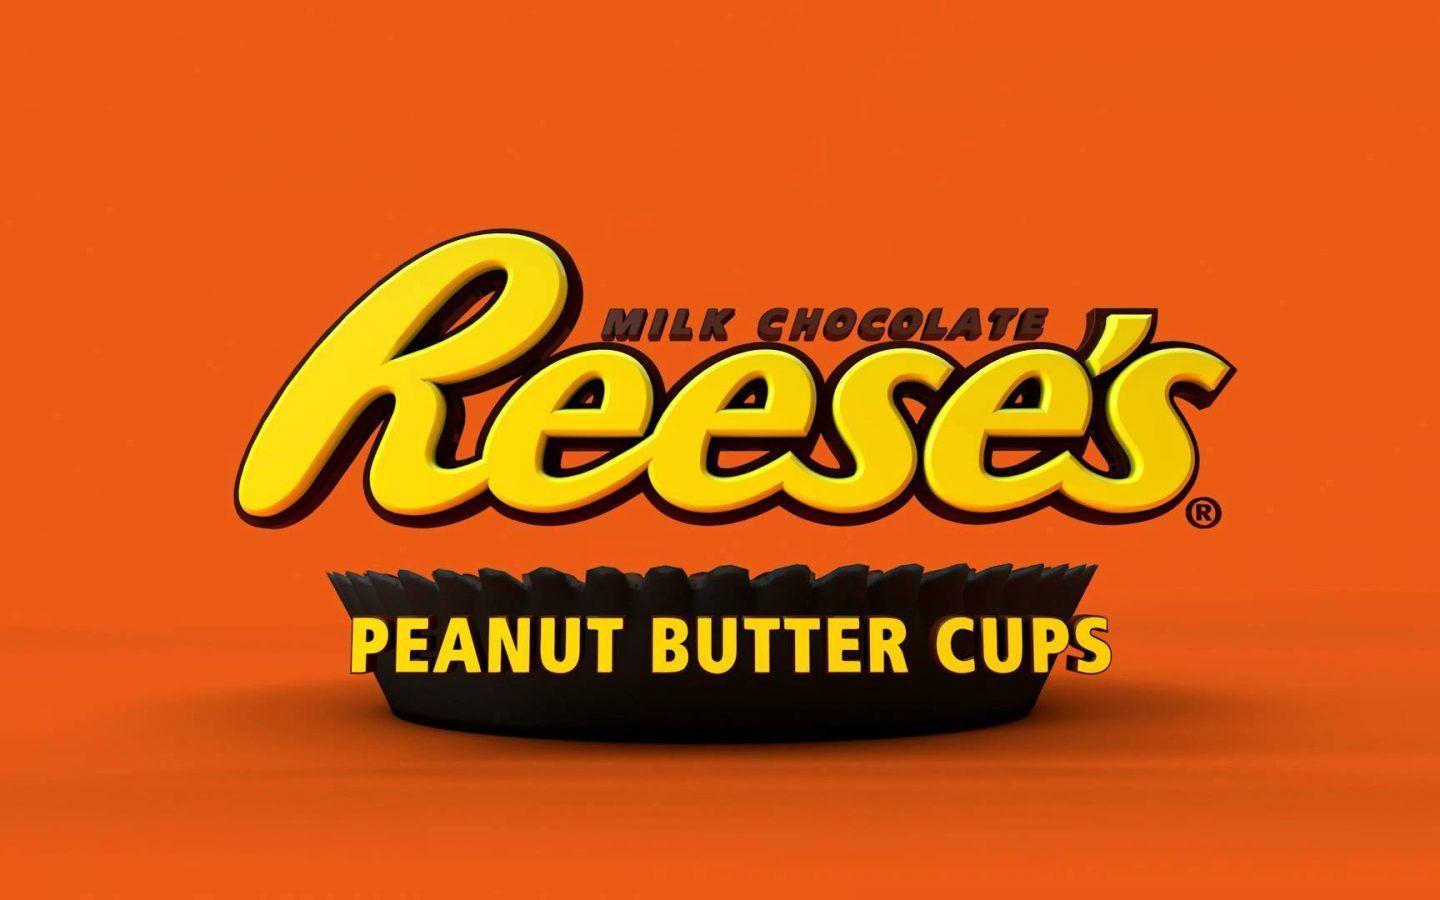 Reese's Logo - Reese's Peanut Butter Cup Logo Wallpaper. PaperPull. Candy Logos